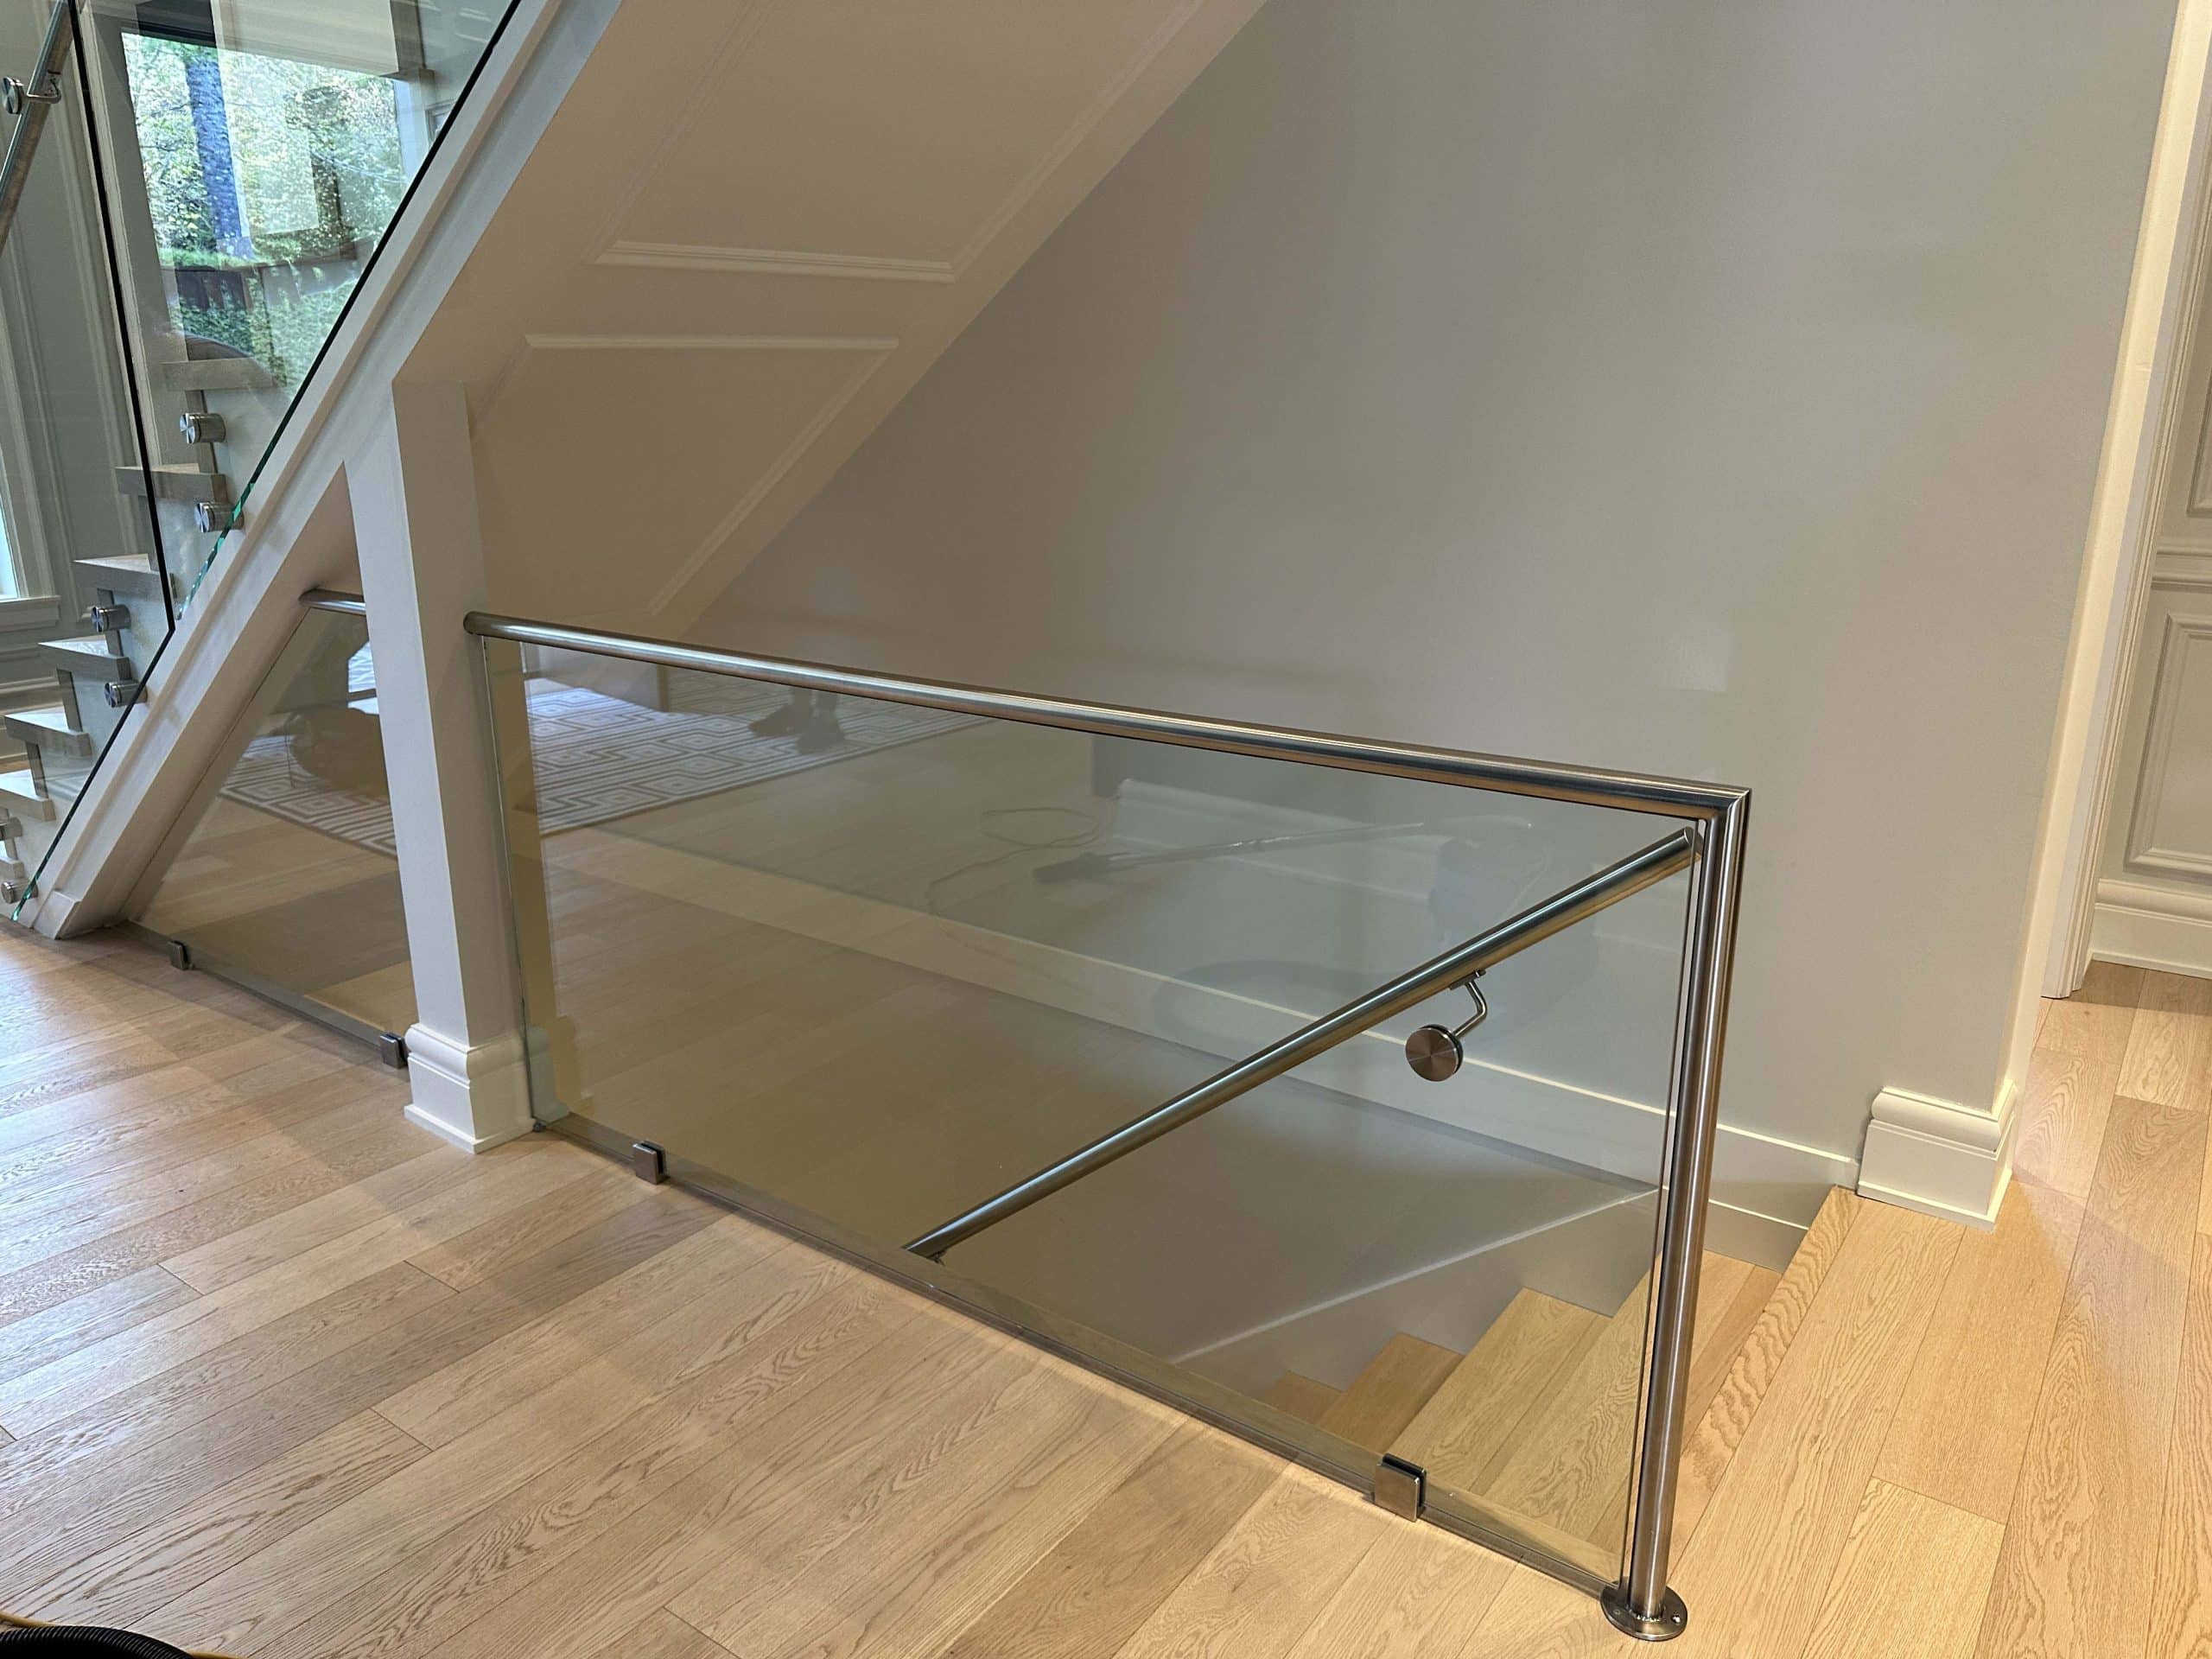 Glass railing and stairs in a modern house, providing a sleek and transparent aesthetic.